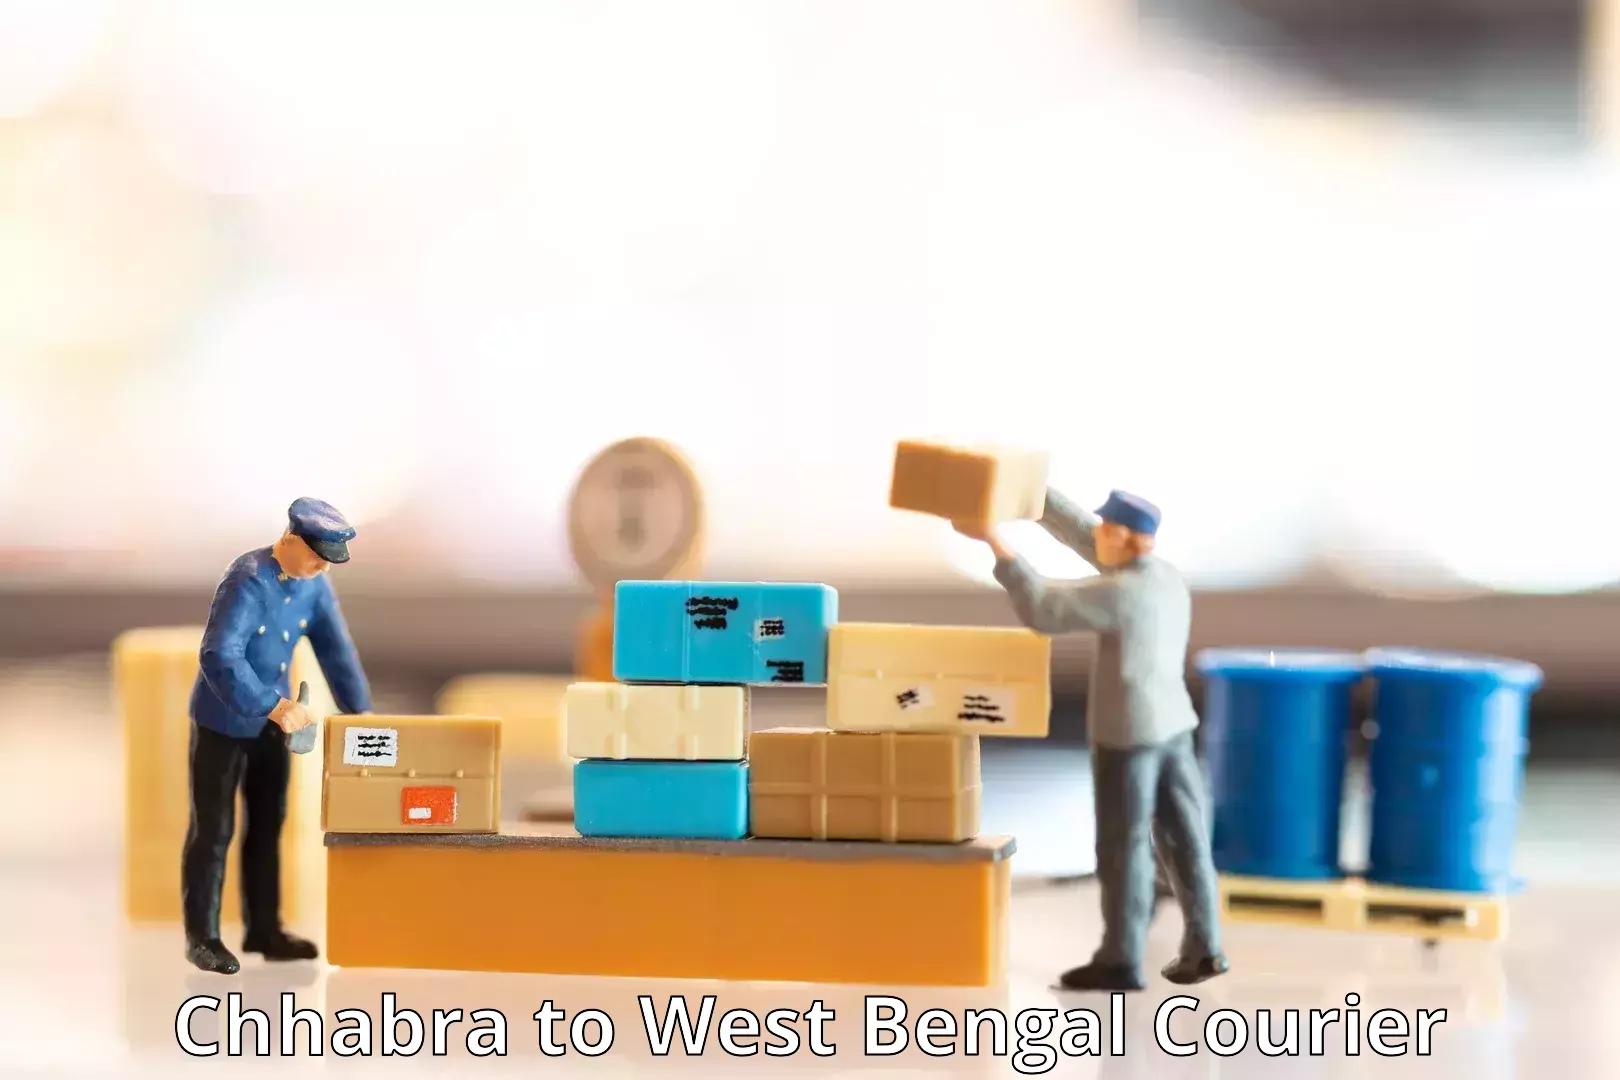 Express delivery capabilities Chhabra to Nabadwip